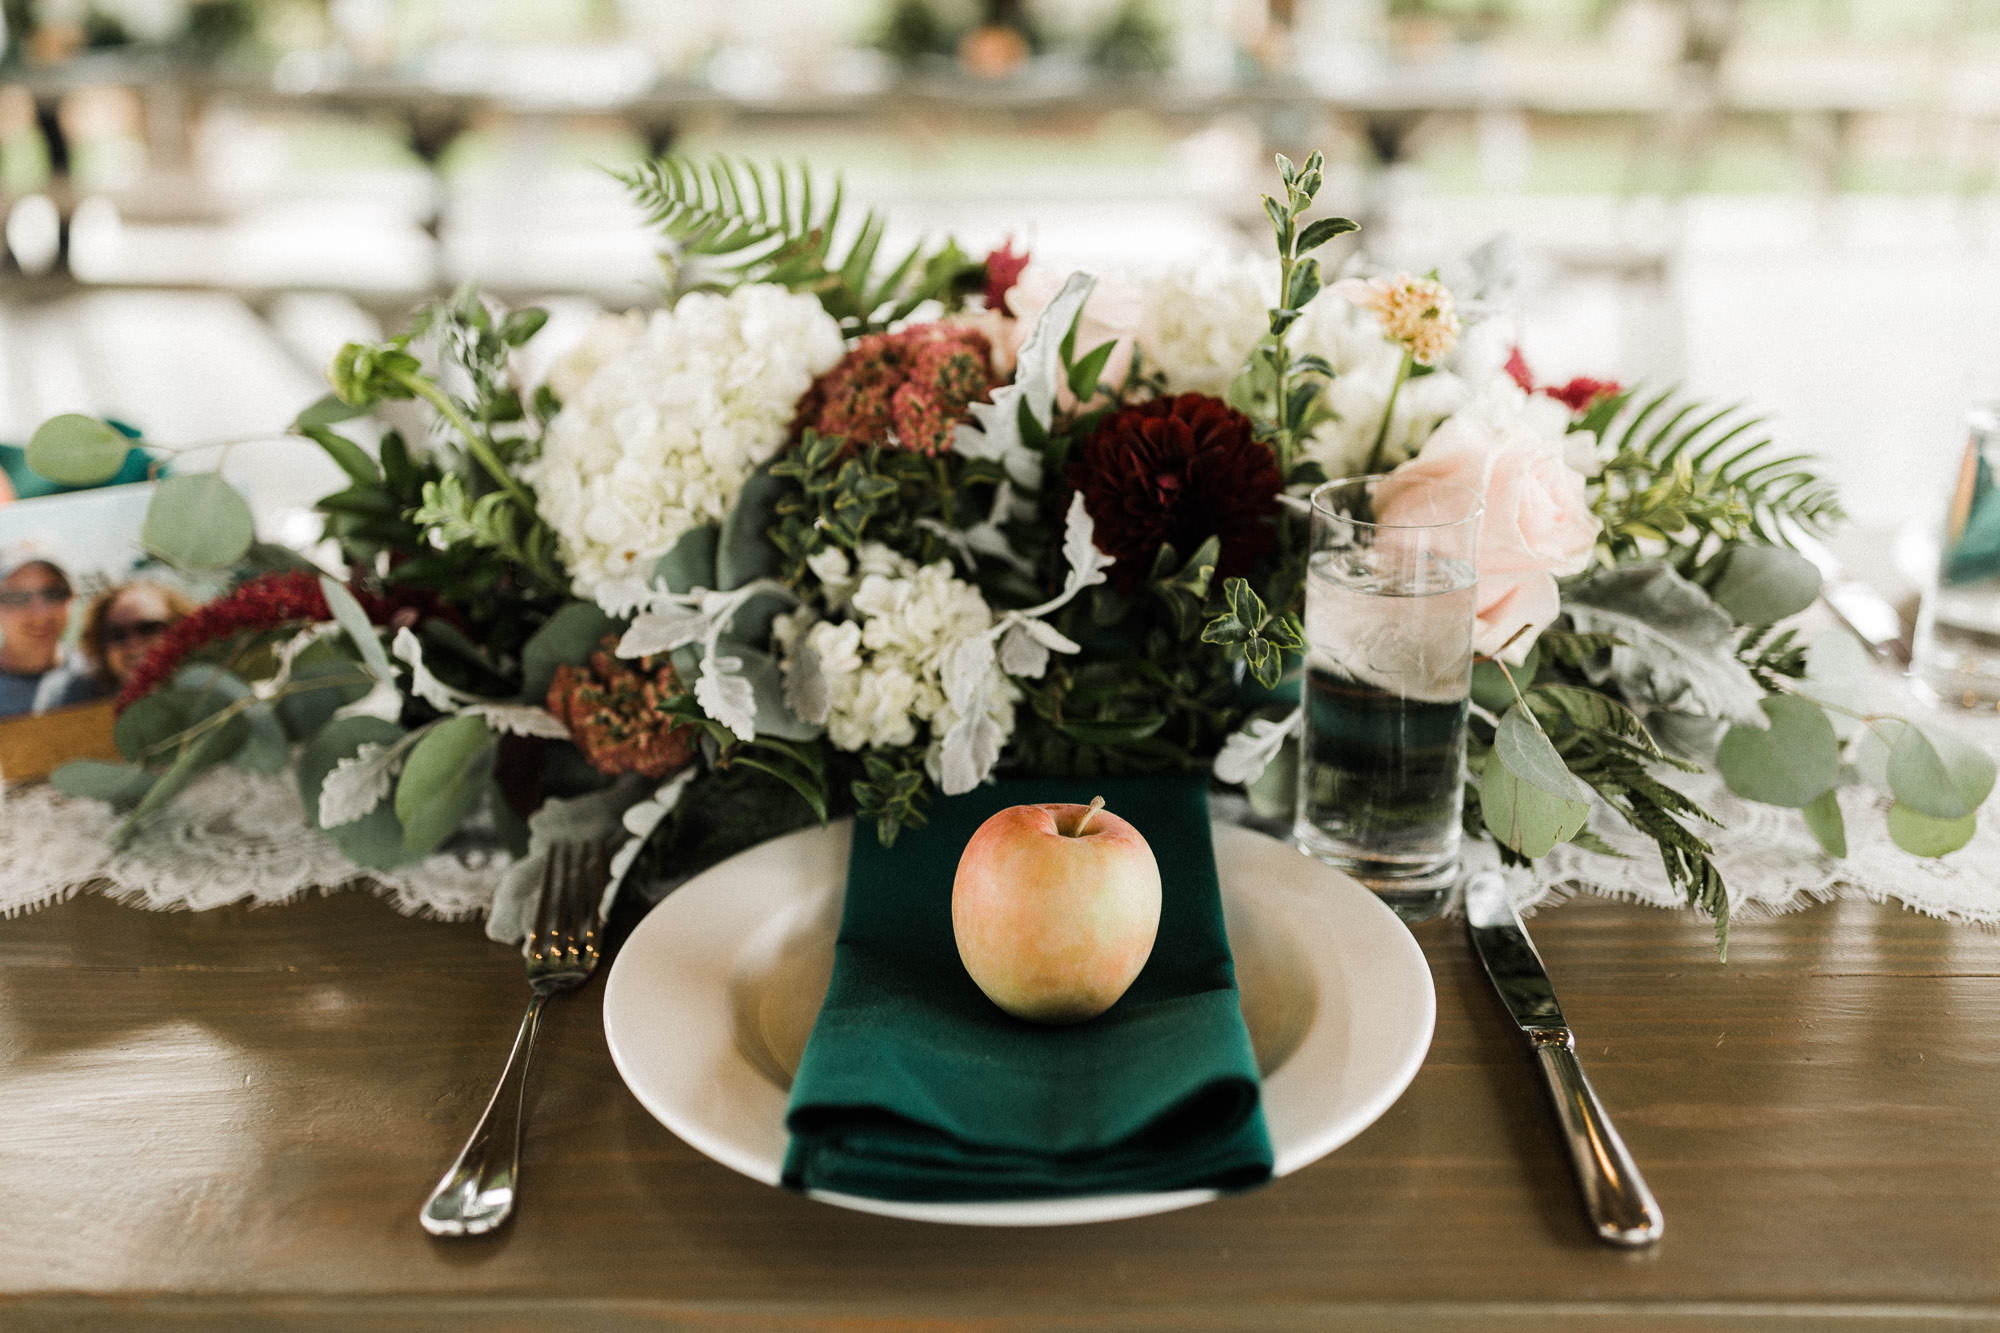 An apple adorns a place setting, with a floral arrangement behind it, at a farm-style table at Mt. View Orchards.